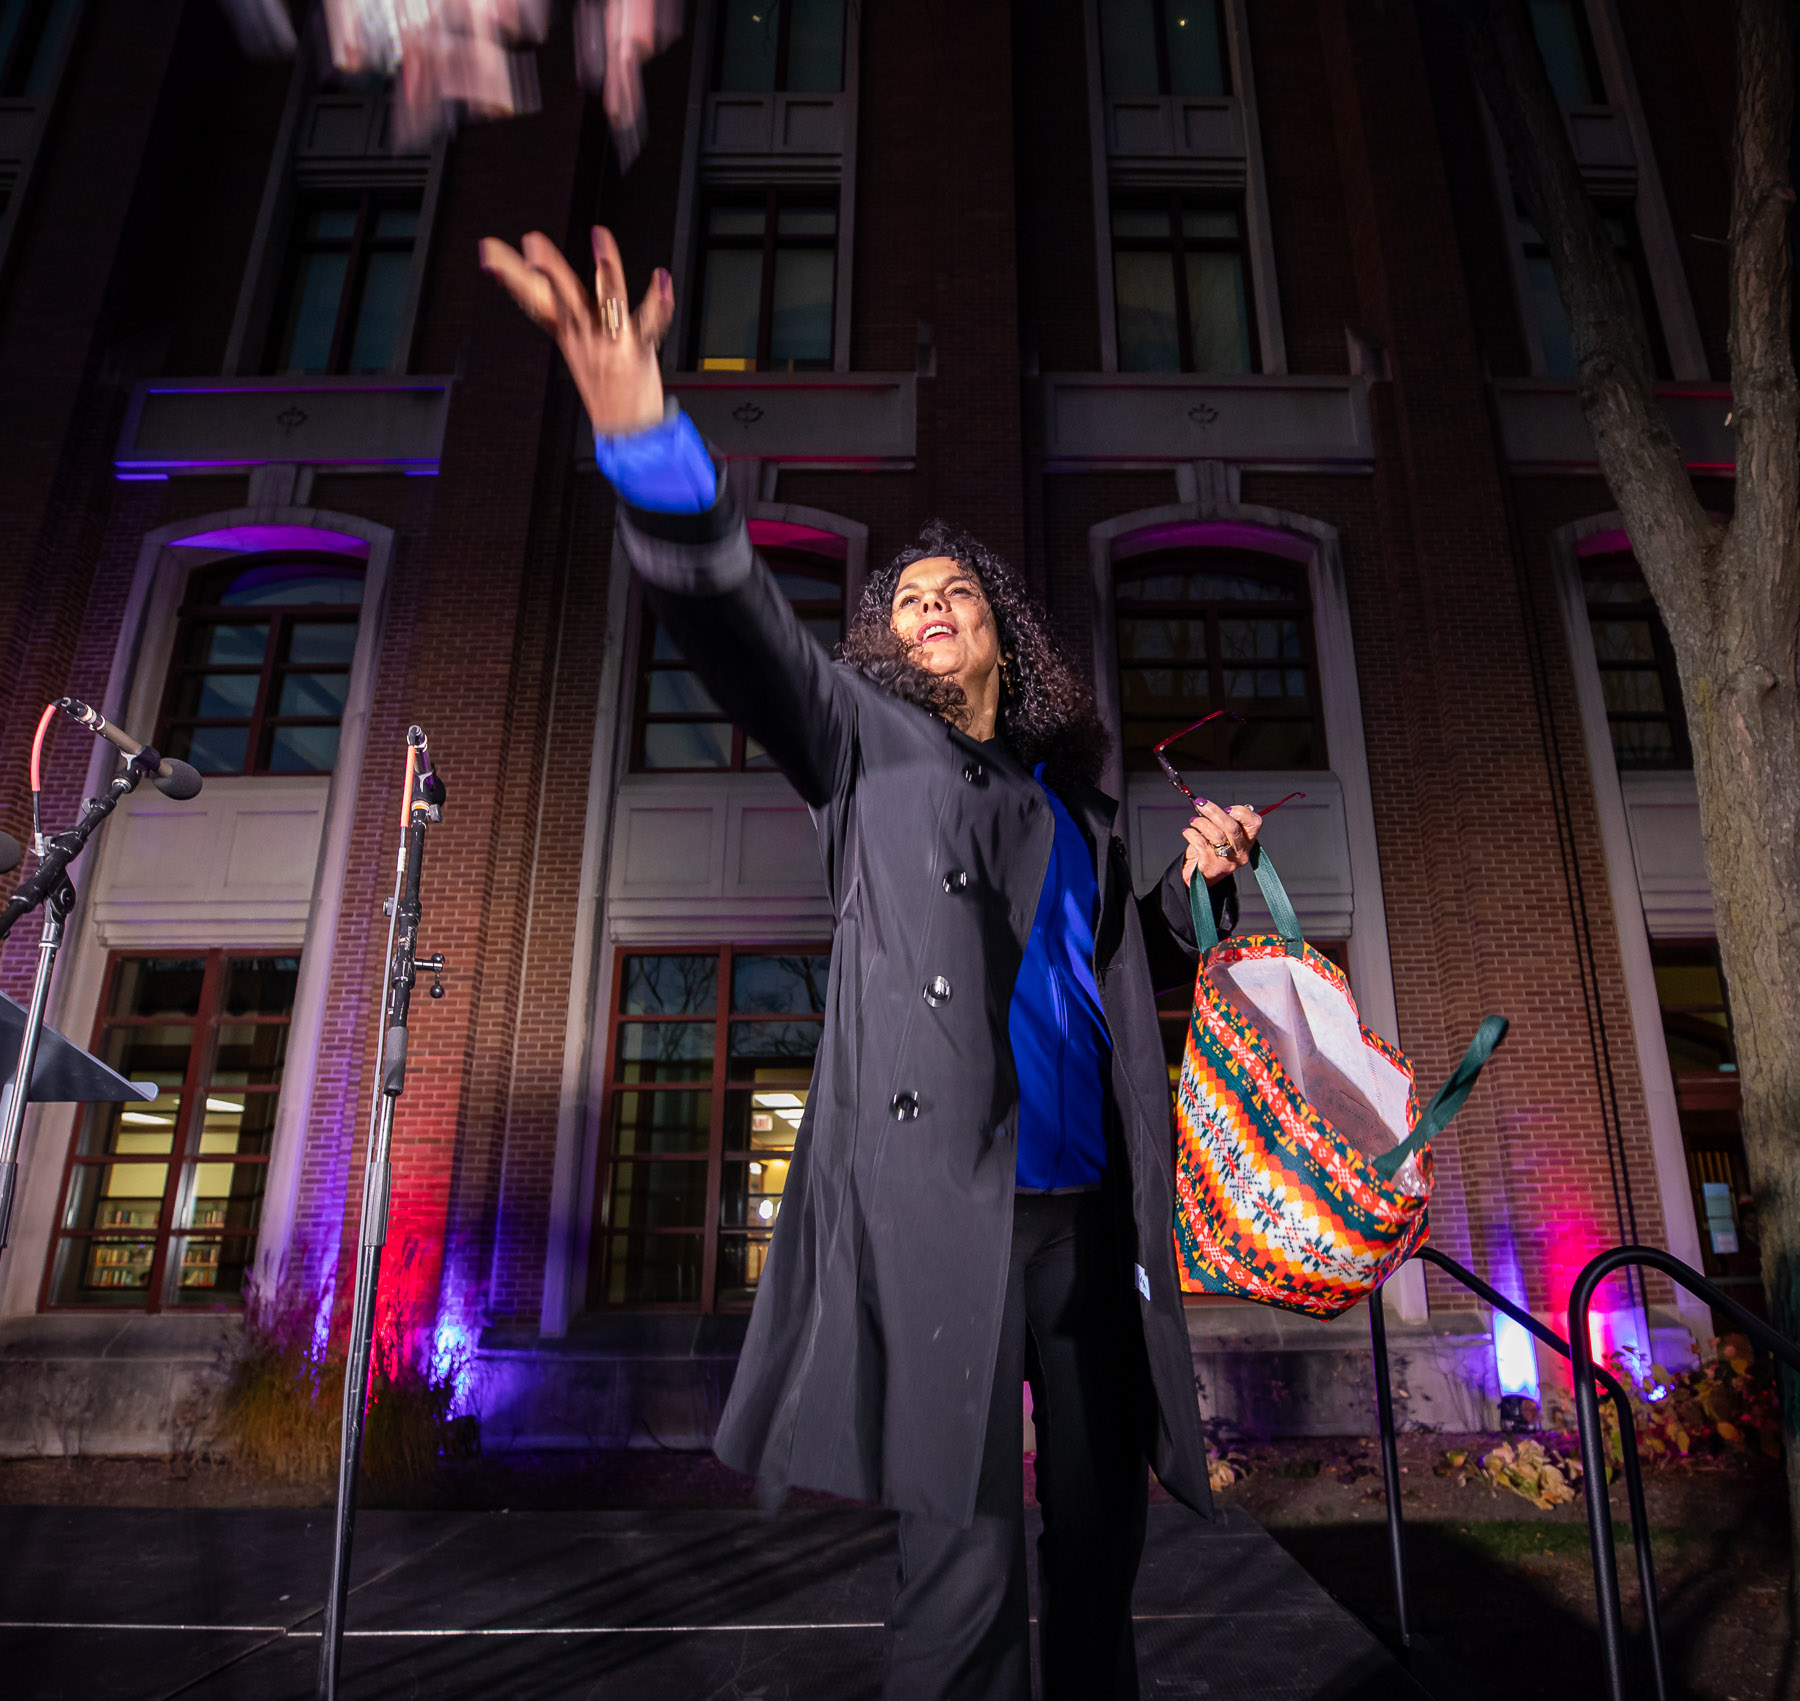 Provost Salma Ghanem tossed candy canes to students after her speech. (Photo by Jeff Carrion / DePaul University) 